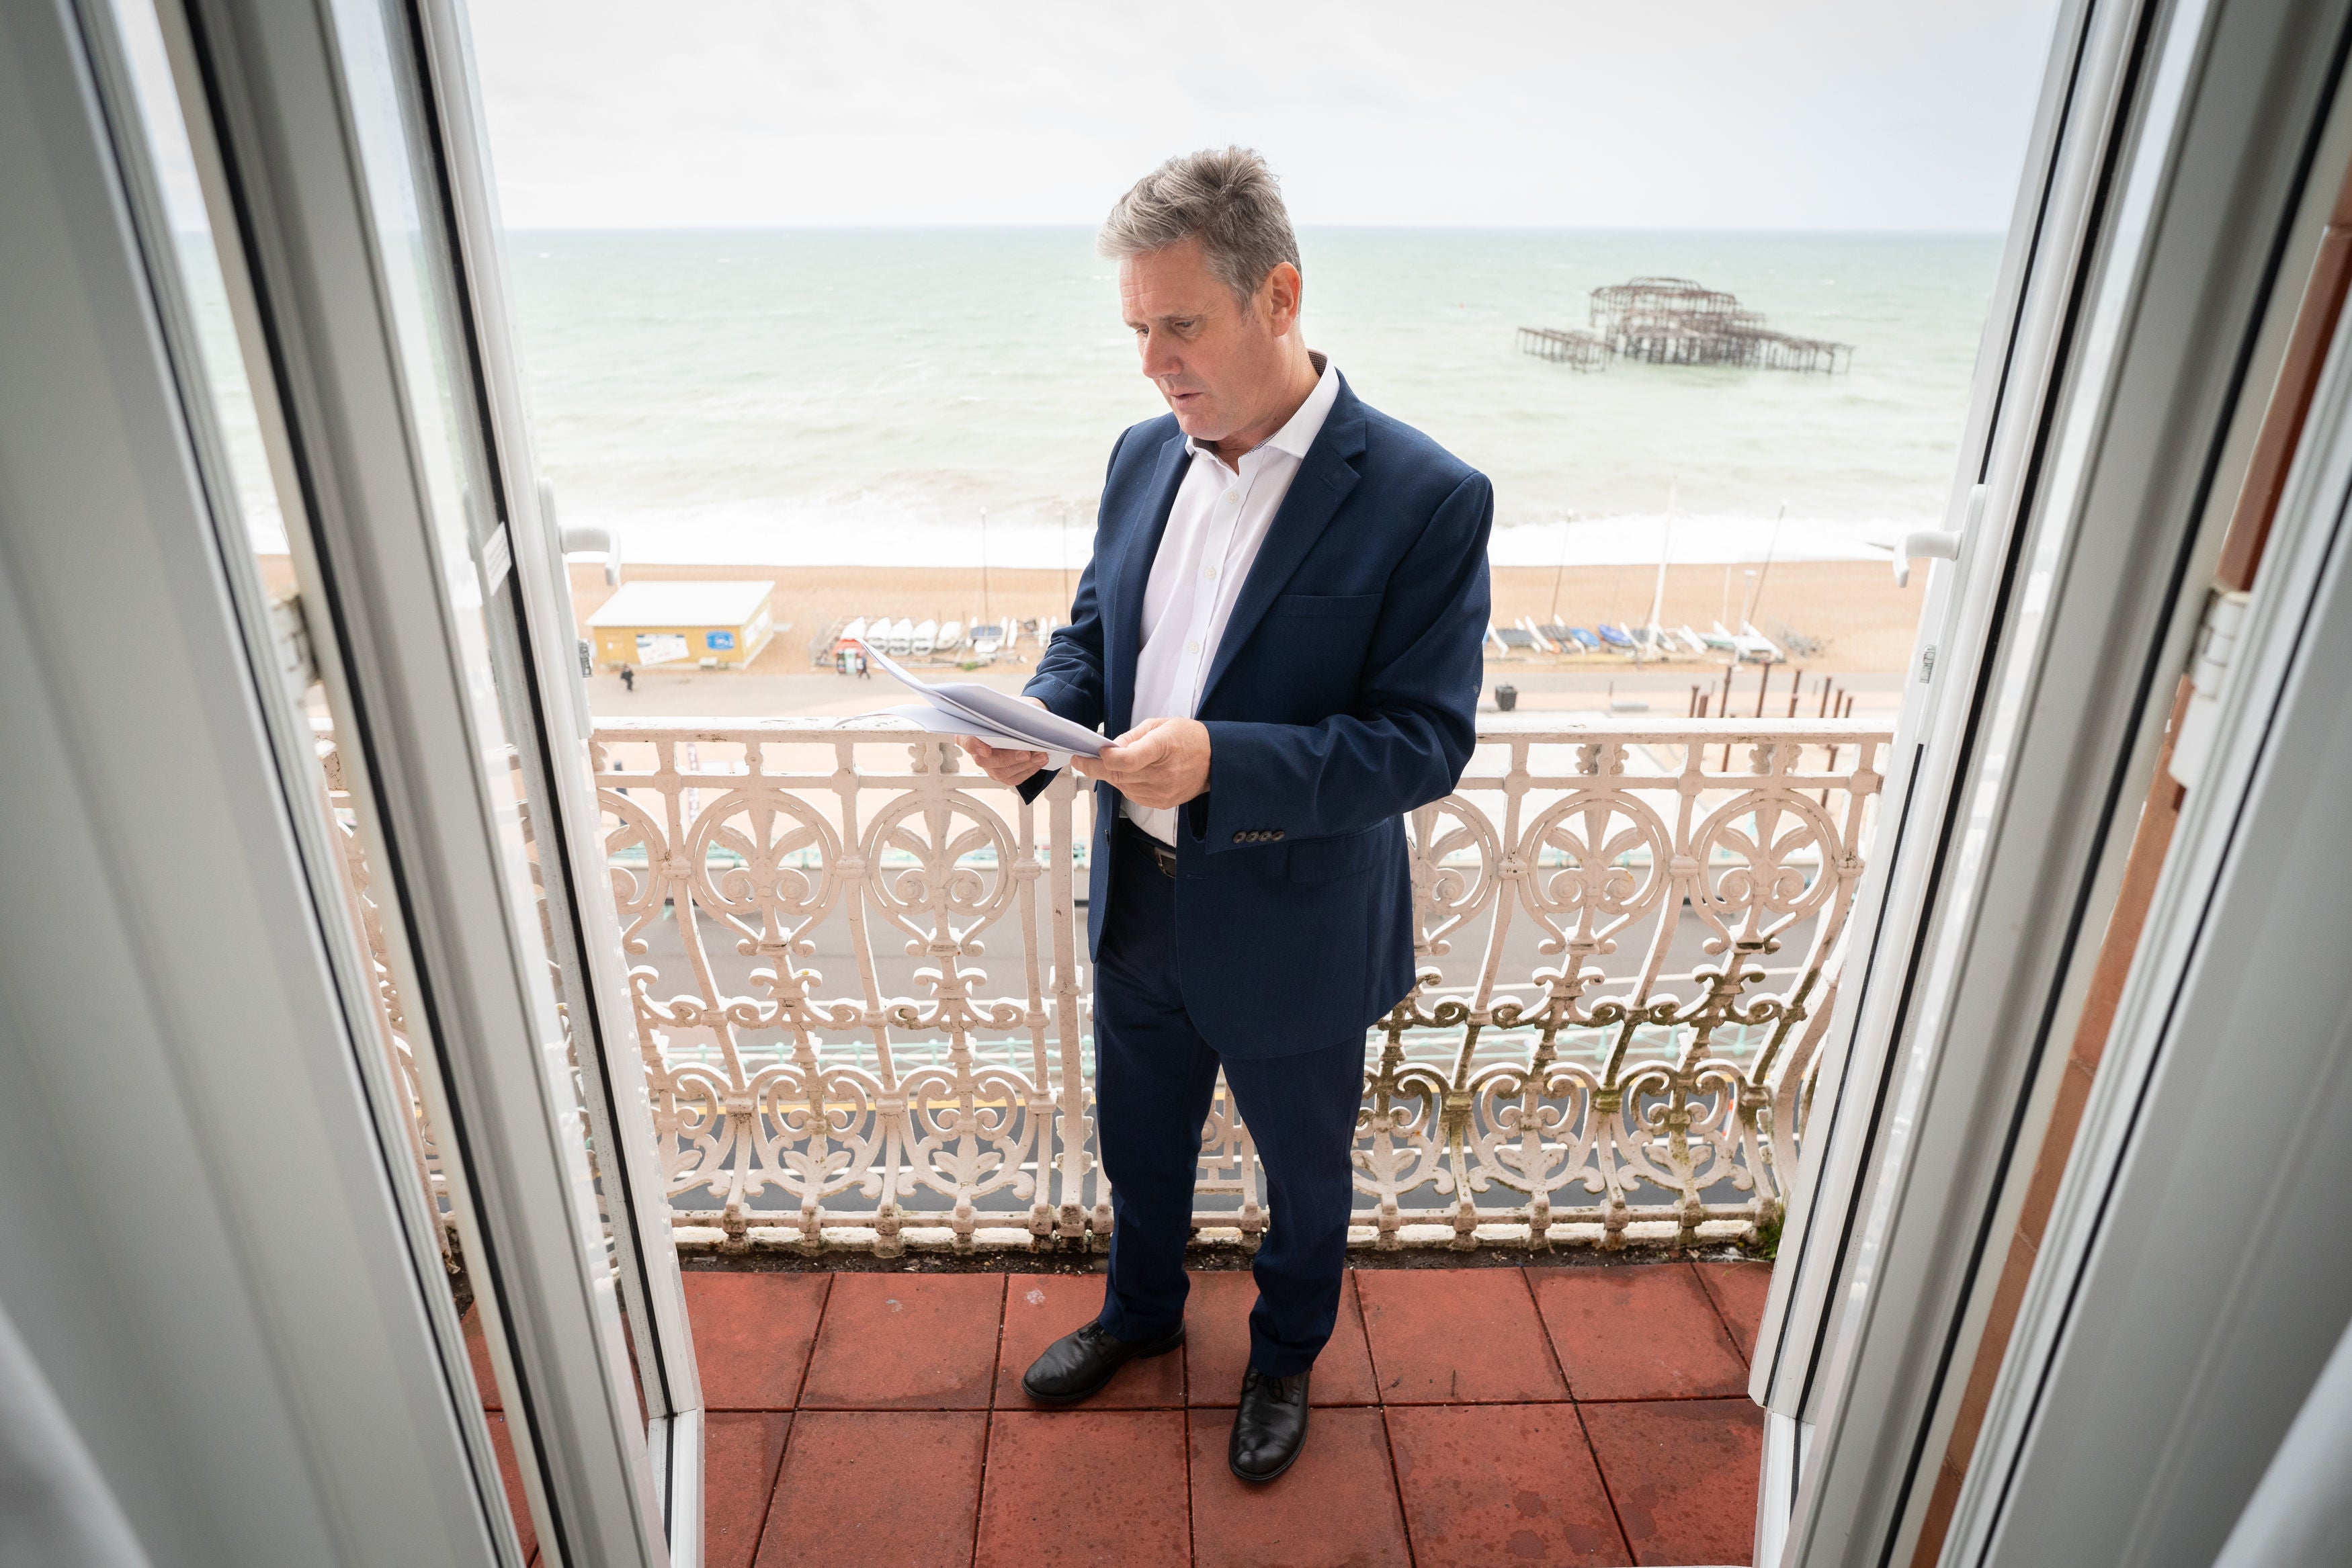 What happens in Brighton stays in Brighton? Keir Starmer prepares his conference speech